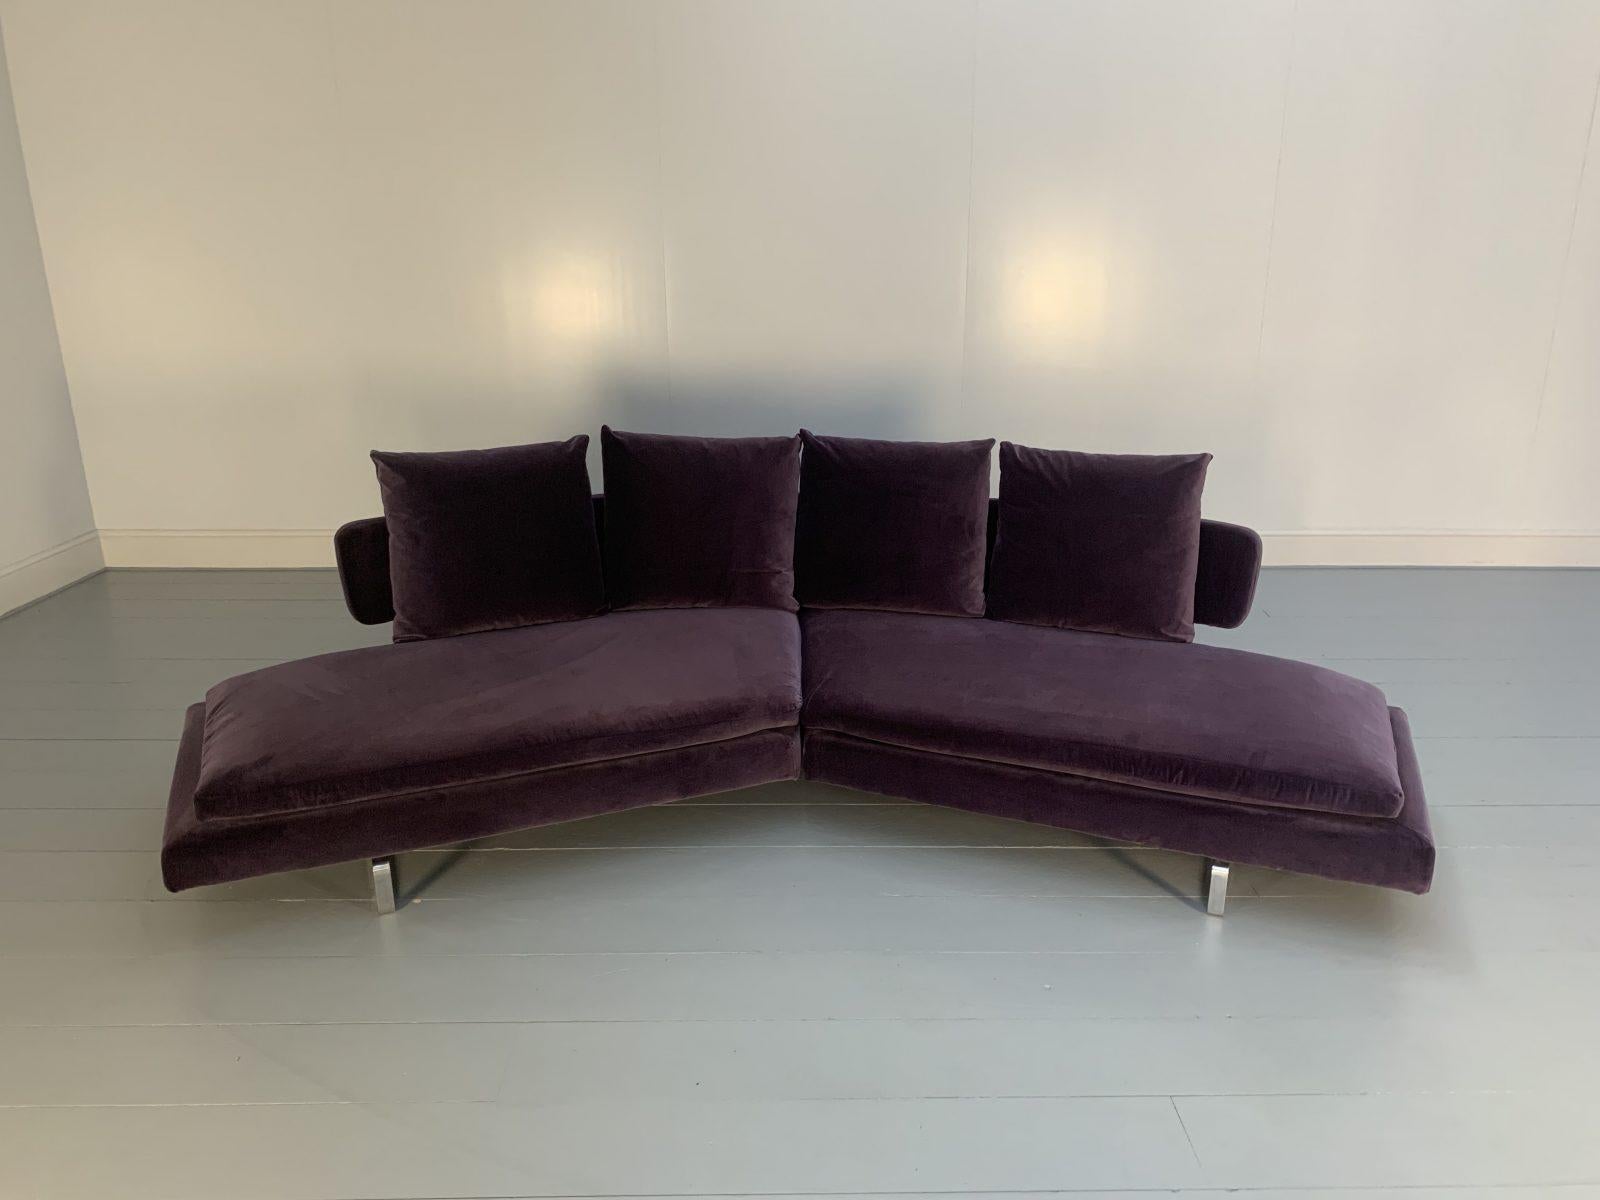 This is a sublime, rare “Arne A252C_1” curved, 4-Seat Sofa from the world renown Italian furniture house of B&B Italia.
 
In a world of temporary pleasures, B&B Italia create beautiful furniture that remains a joy forever. 
 
Both dressed in the